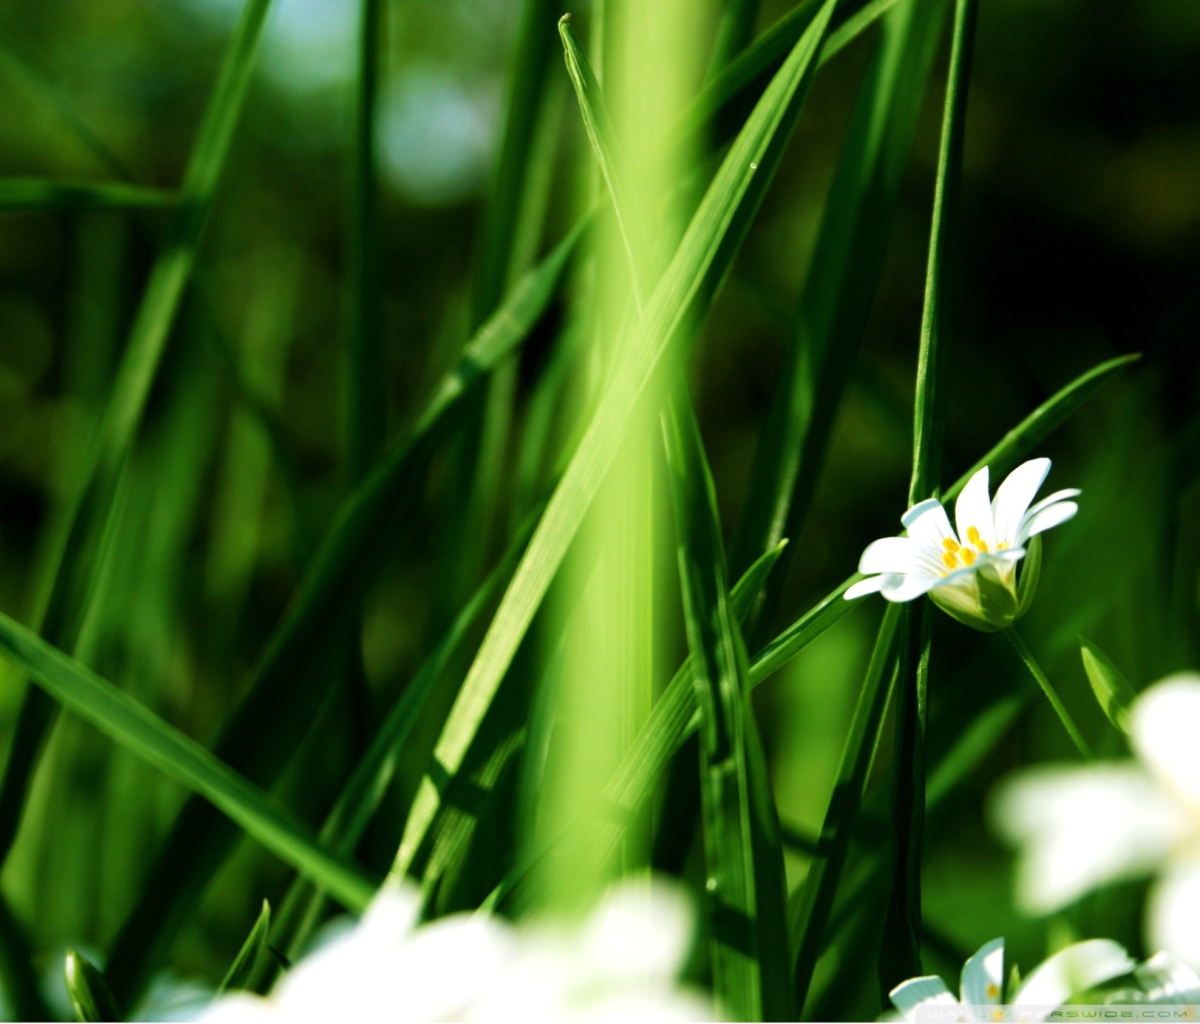 Grass And White Flowers wallpaper 1200x1024